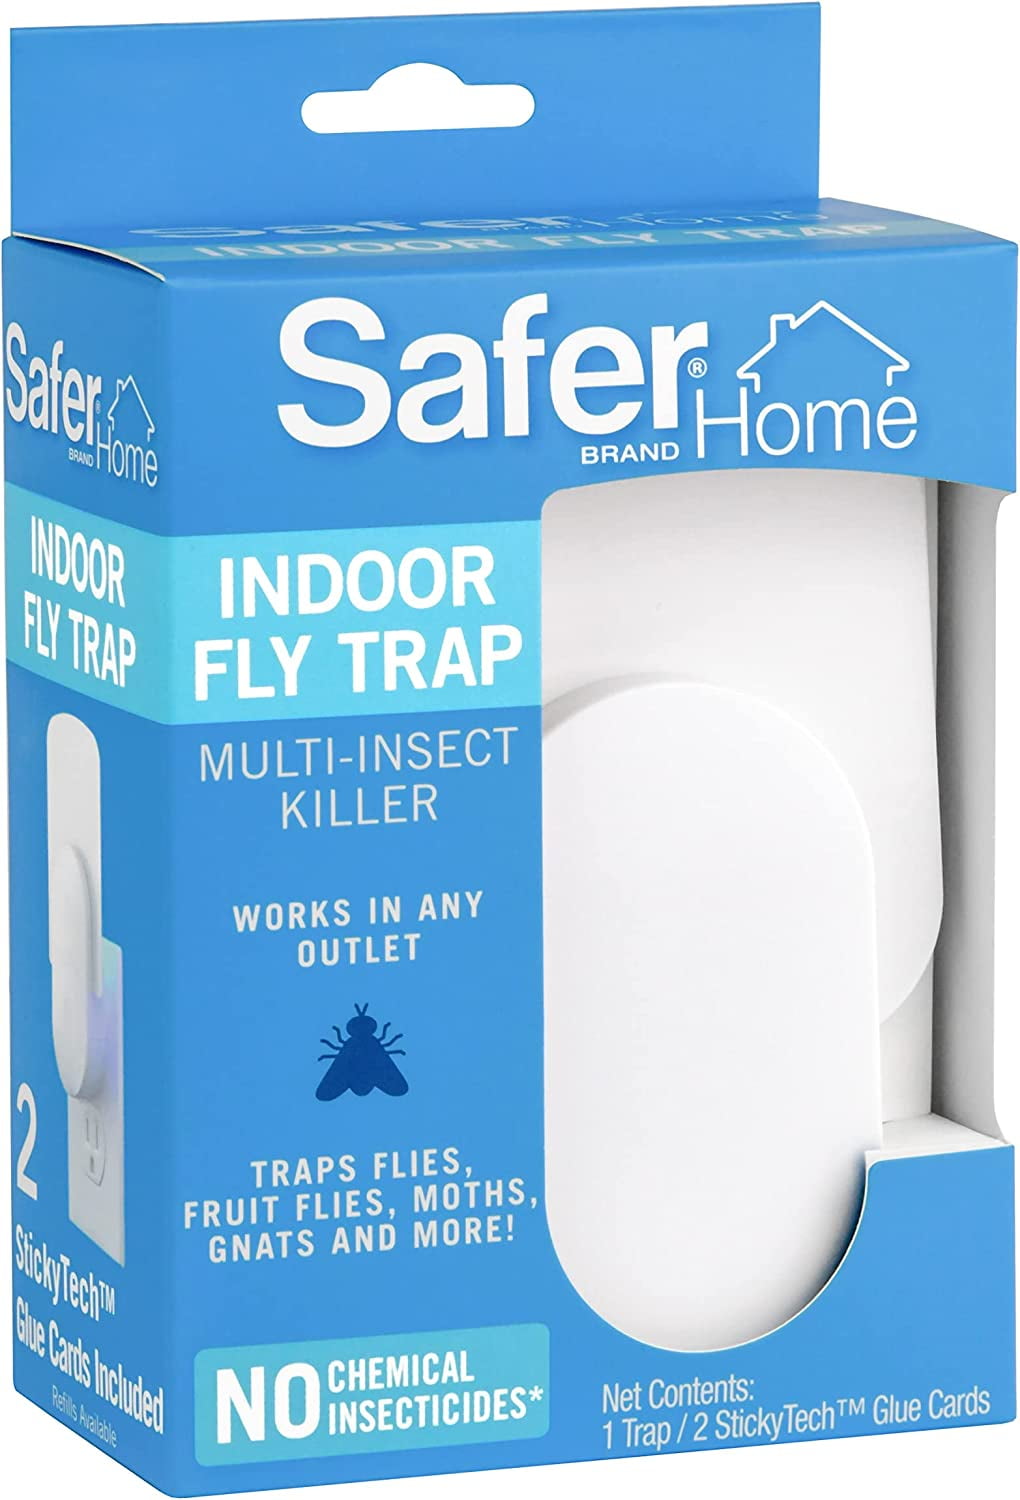 Yates Home Pest Indoor Fruit Fly Trap - 2 Pack